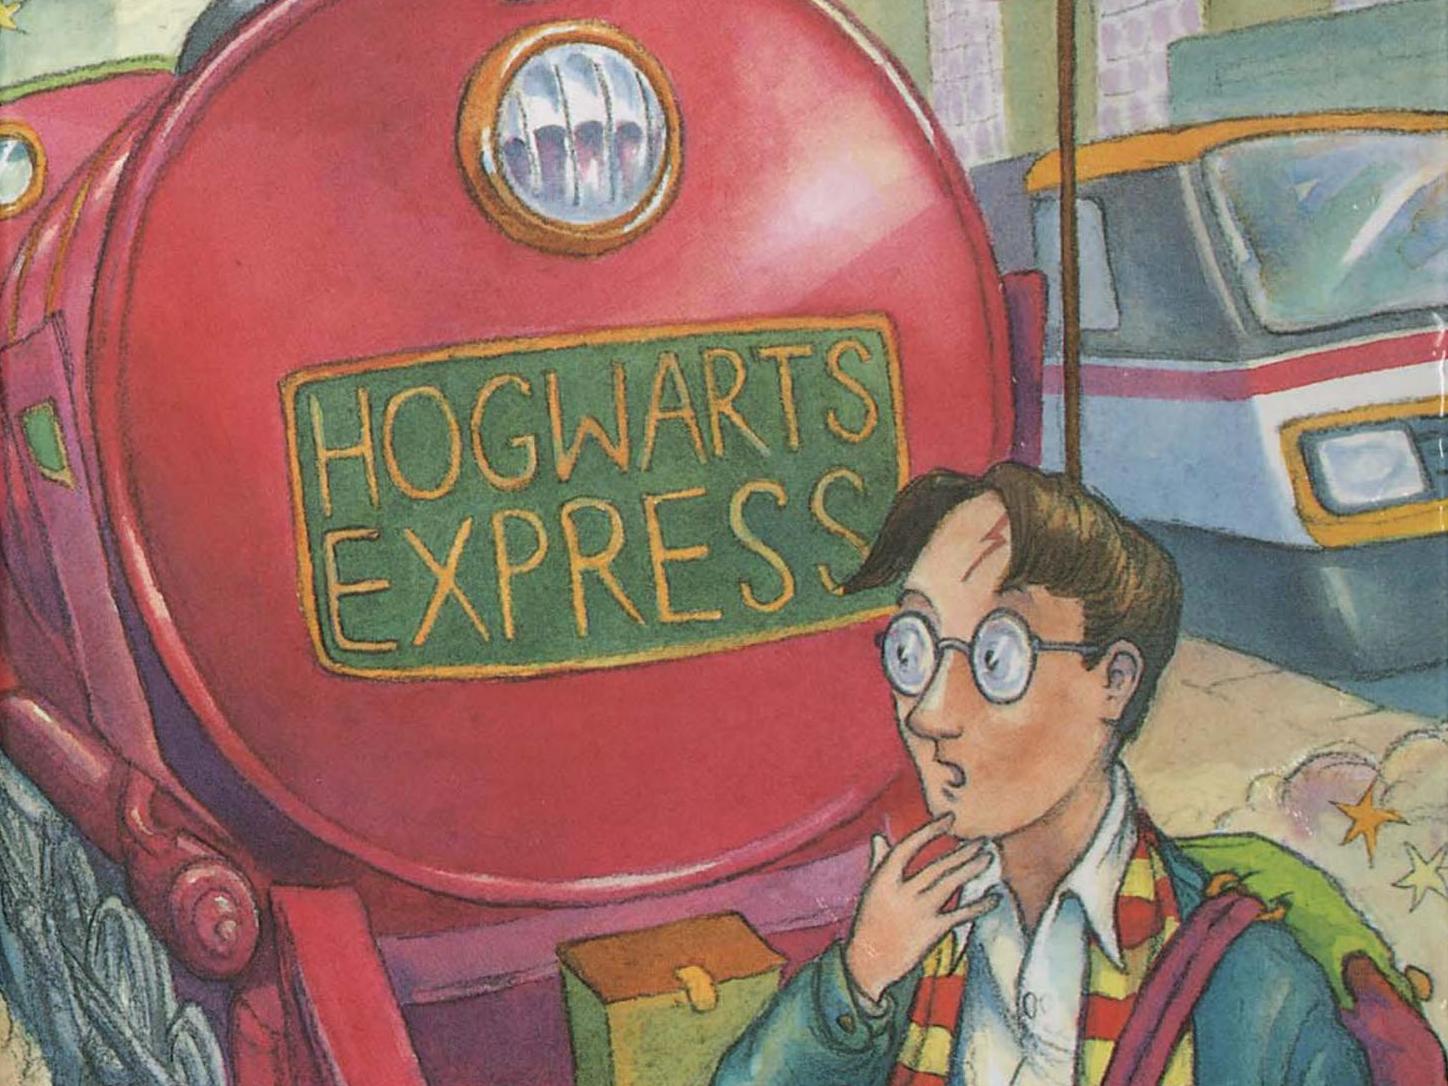 Front cover of Harry Potter and the Philosopher's Stone